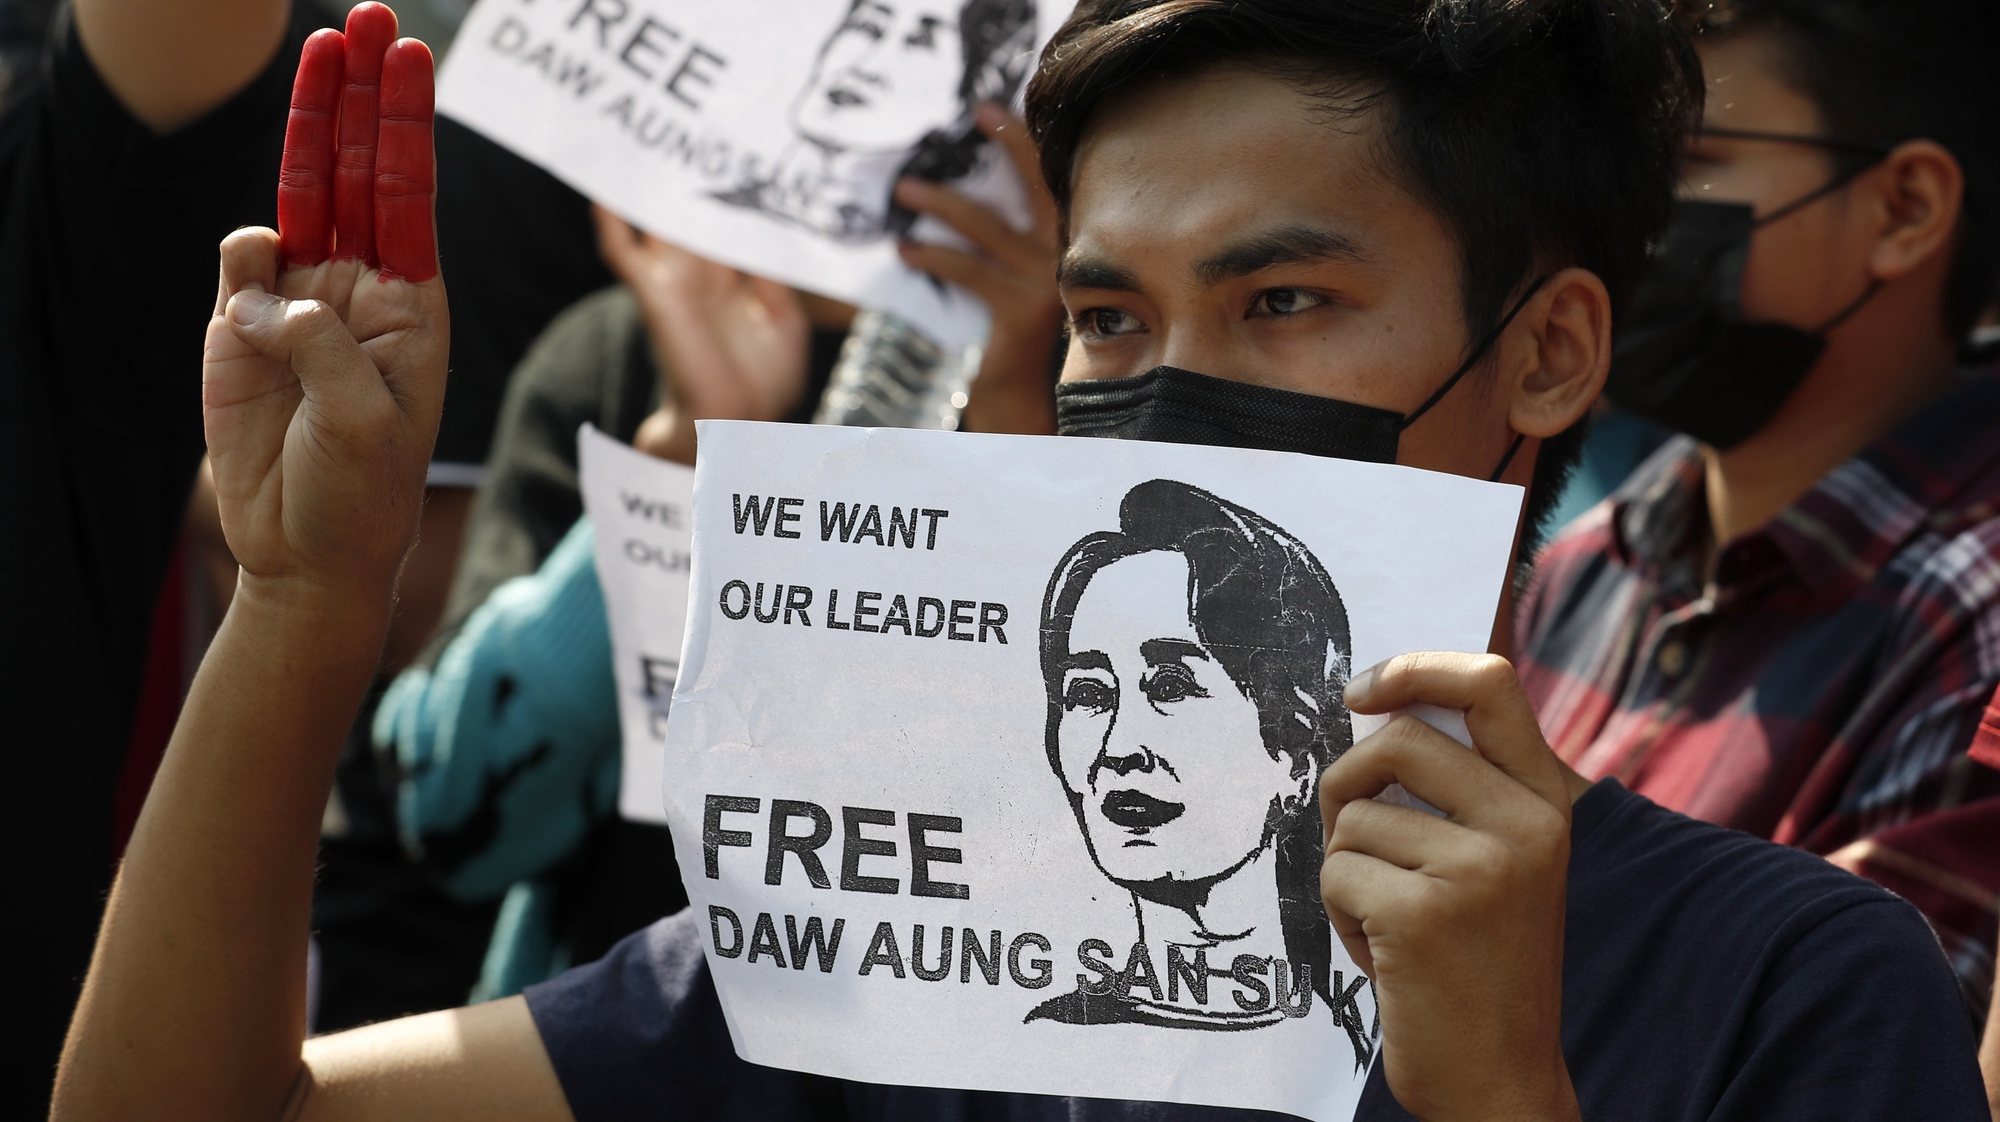 epa08993326 Protesters hold portraits of detained Myanmar State Counselor Aung San Suu Kyi reading &#039;We Want Our Leader Free&#039; and flash the three-finger salute, a symbol of resistance, during a protest against the military coup in Yangon, Myanmar, 07 February 2021. Thousands of people took to the streets of Yangon, Myanmar&#039;s biggest city, for a second day of mass protests against the military coup amid internet shut down imposed by military rulers. Myanmar&#039;s military seized power and declared a state of emergency for one year after arresting State Counselor Aung San Suu Kyi and Myanmar president Win Myint in an early morning raid on 01 February.  EPA/NYEIN CHAN NAING